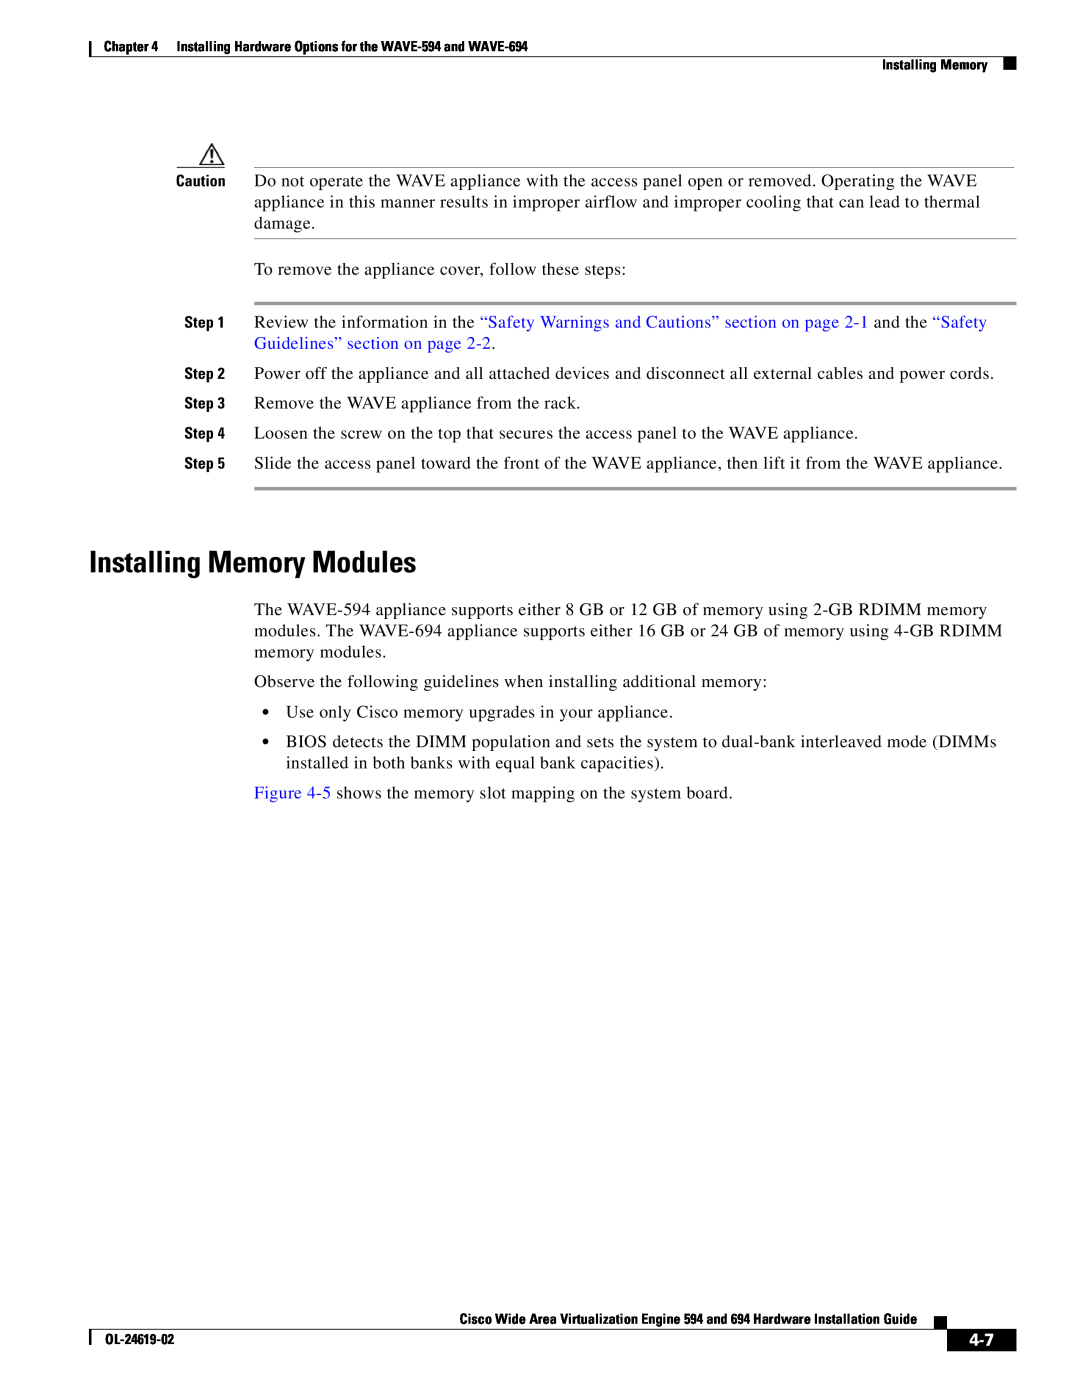 Cisco Systems 694, WAVE594K9 manual Installing Memory Modules 